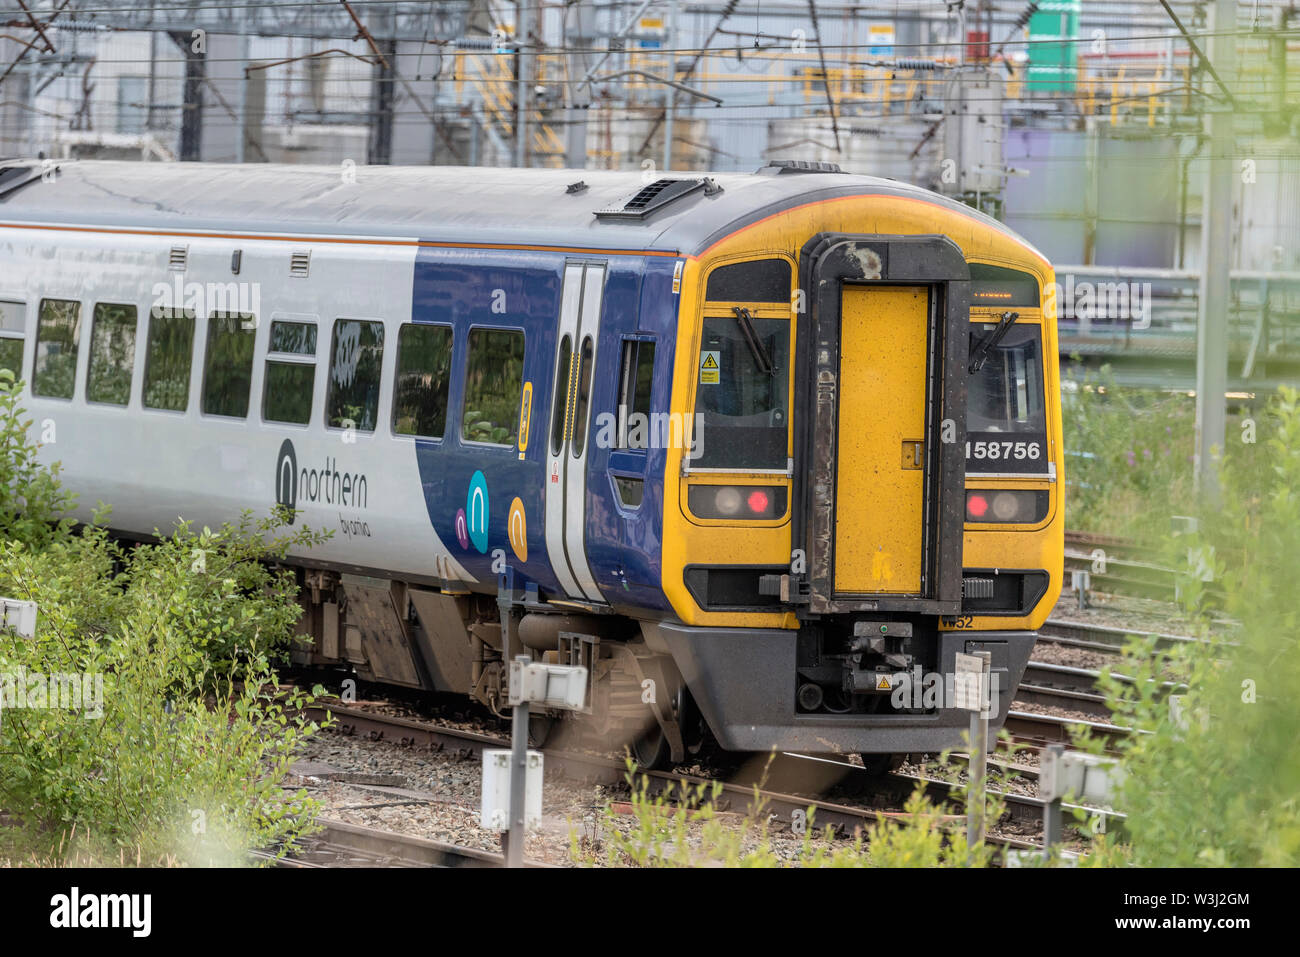 Class 158 Northern diesel train. Class 158 Express Sprinter is a diesel multiple-unit Stock Photo